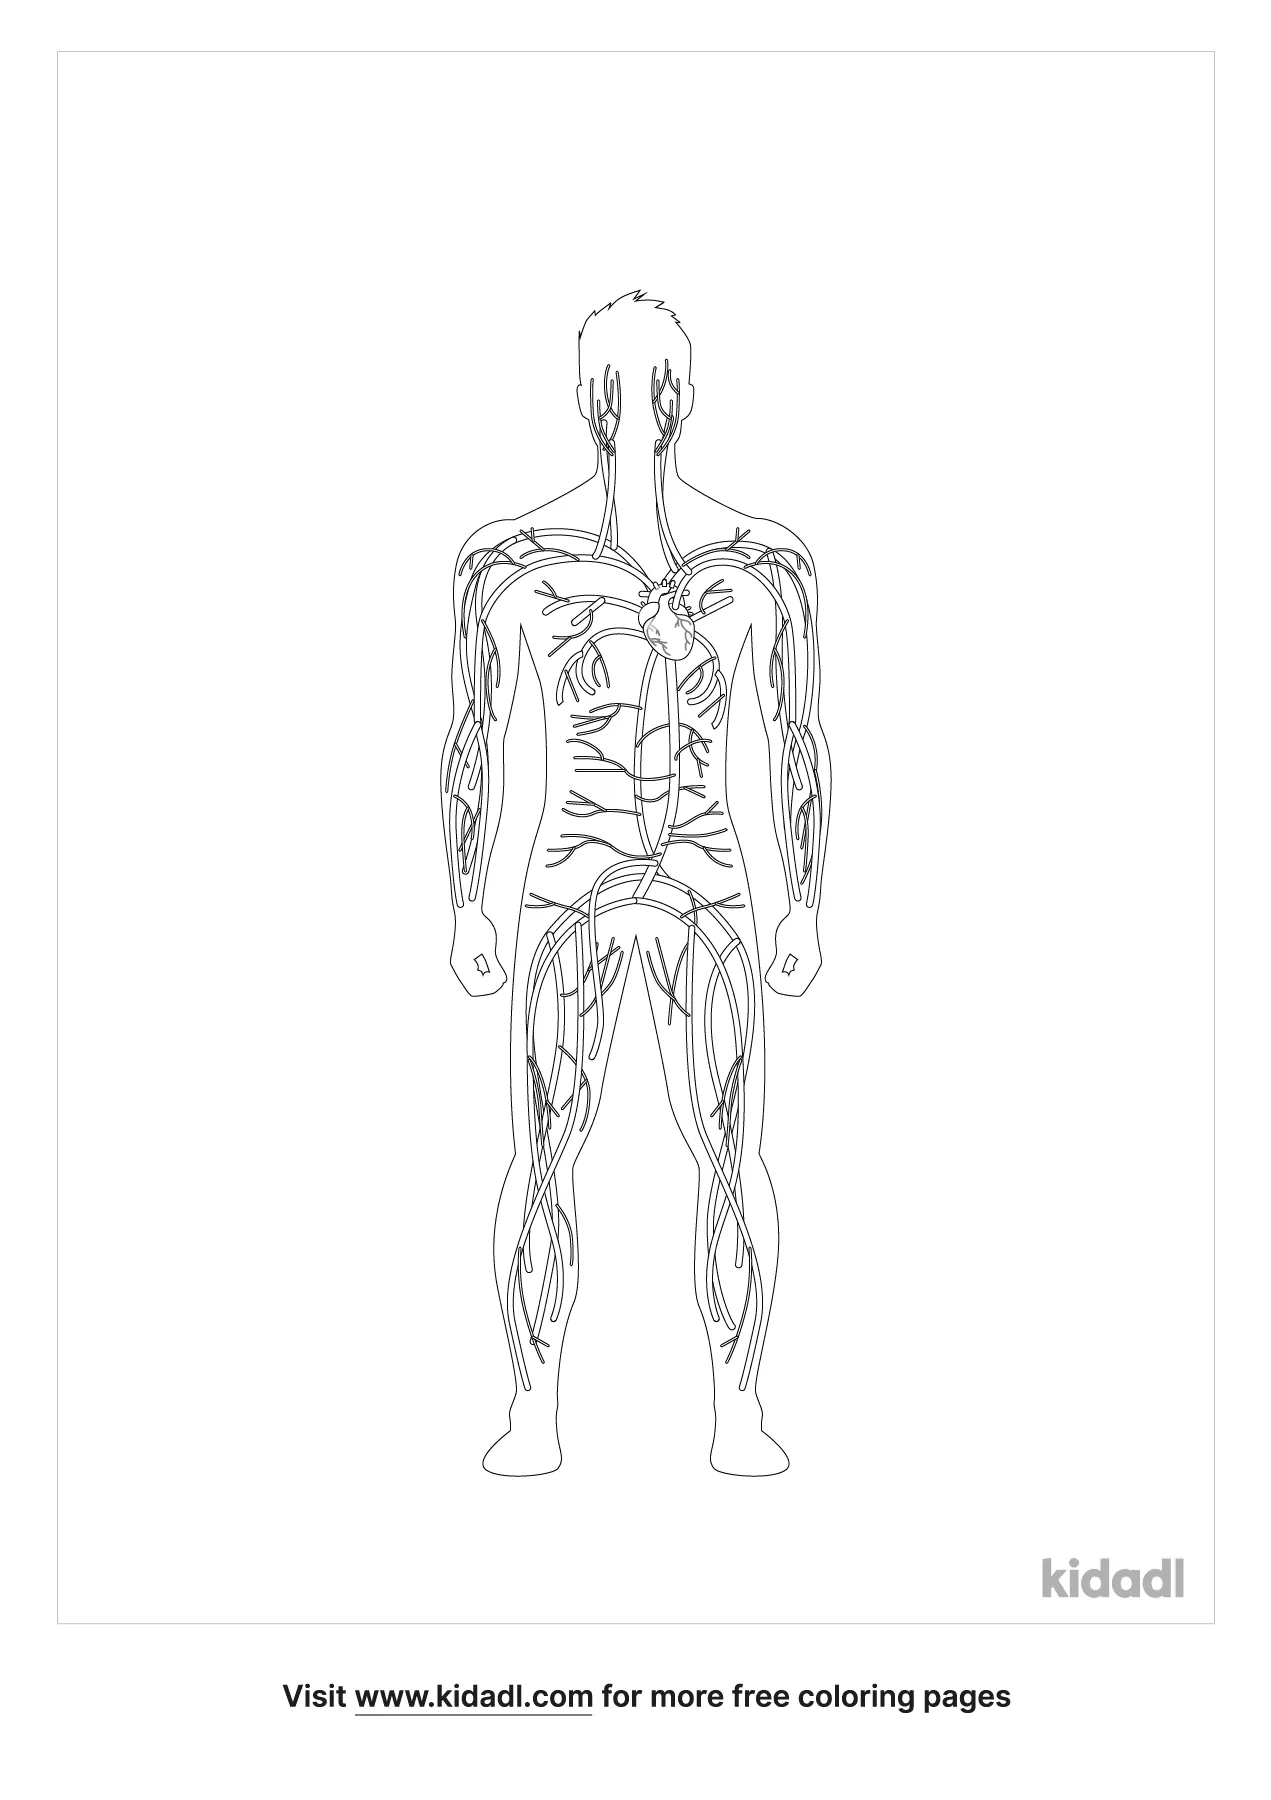 Free Anatomy Artery Coloring Page | Coloring Page Printables | Kidadl